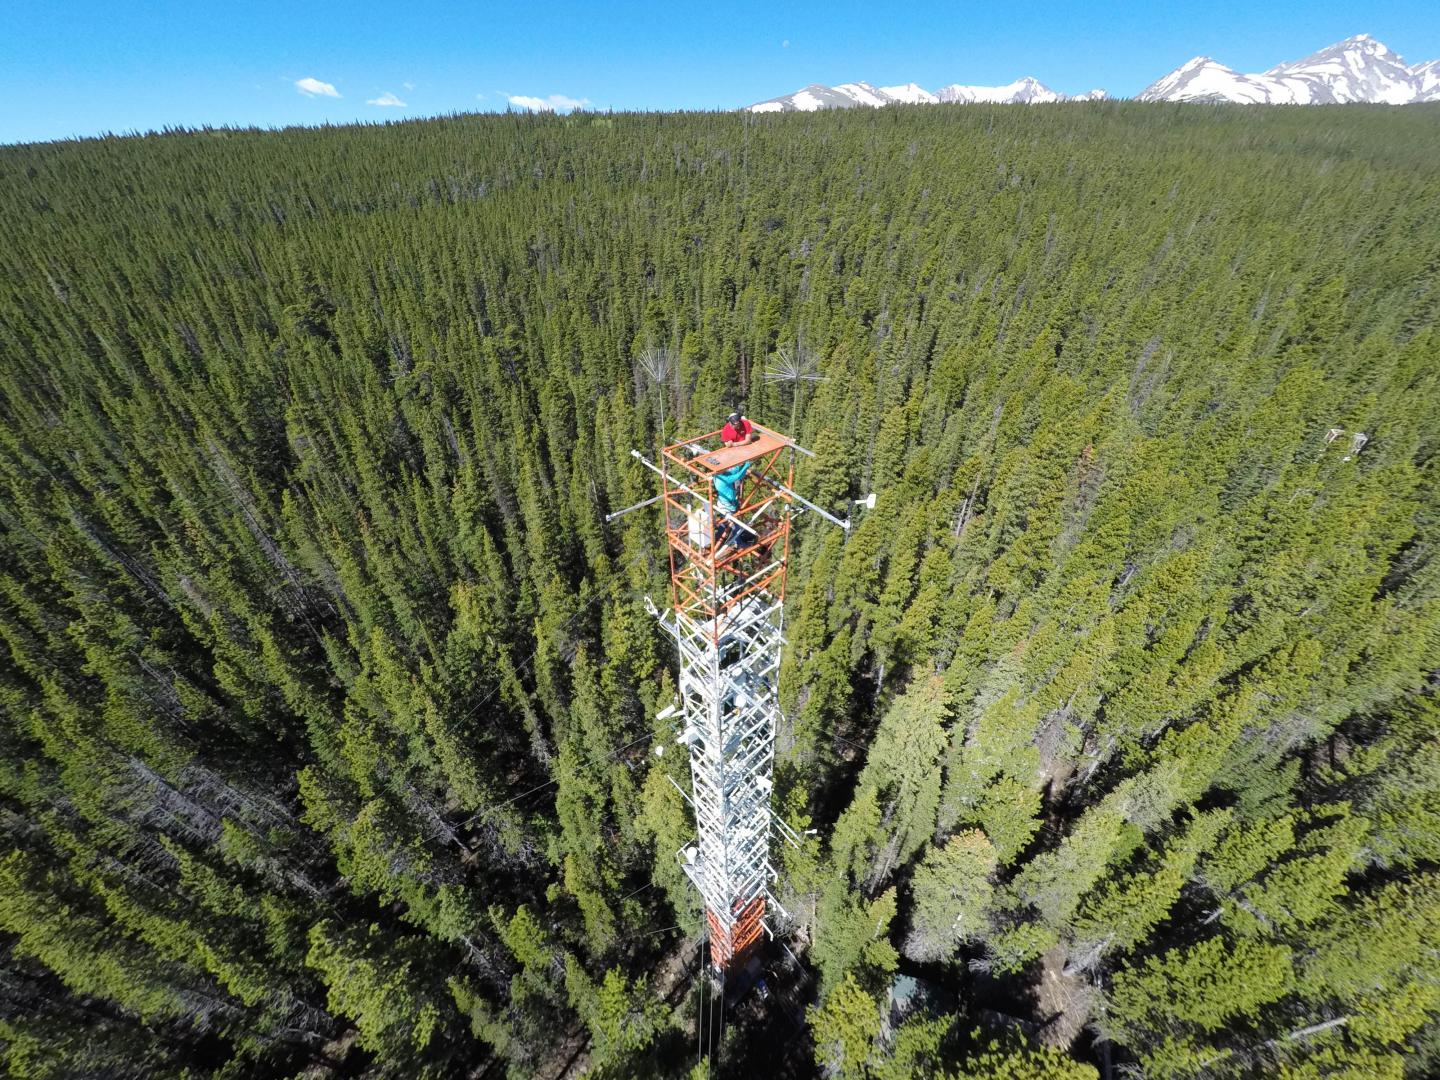 Researchers install a spectrometer on the top of a 26-meter tower in Niwot Ridge, CO.